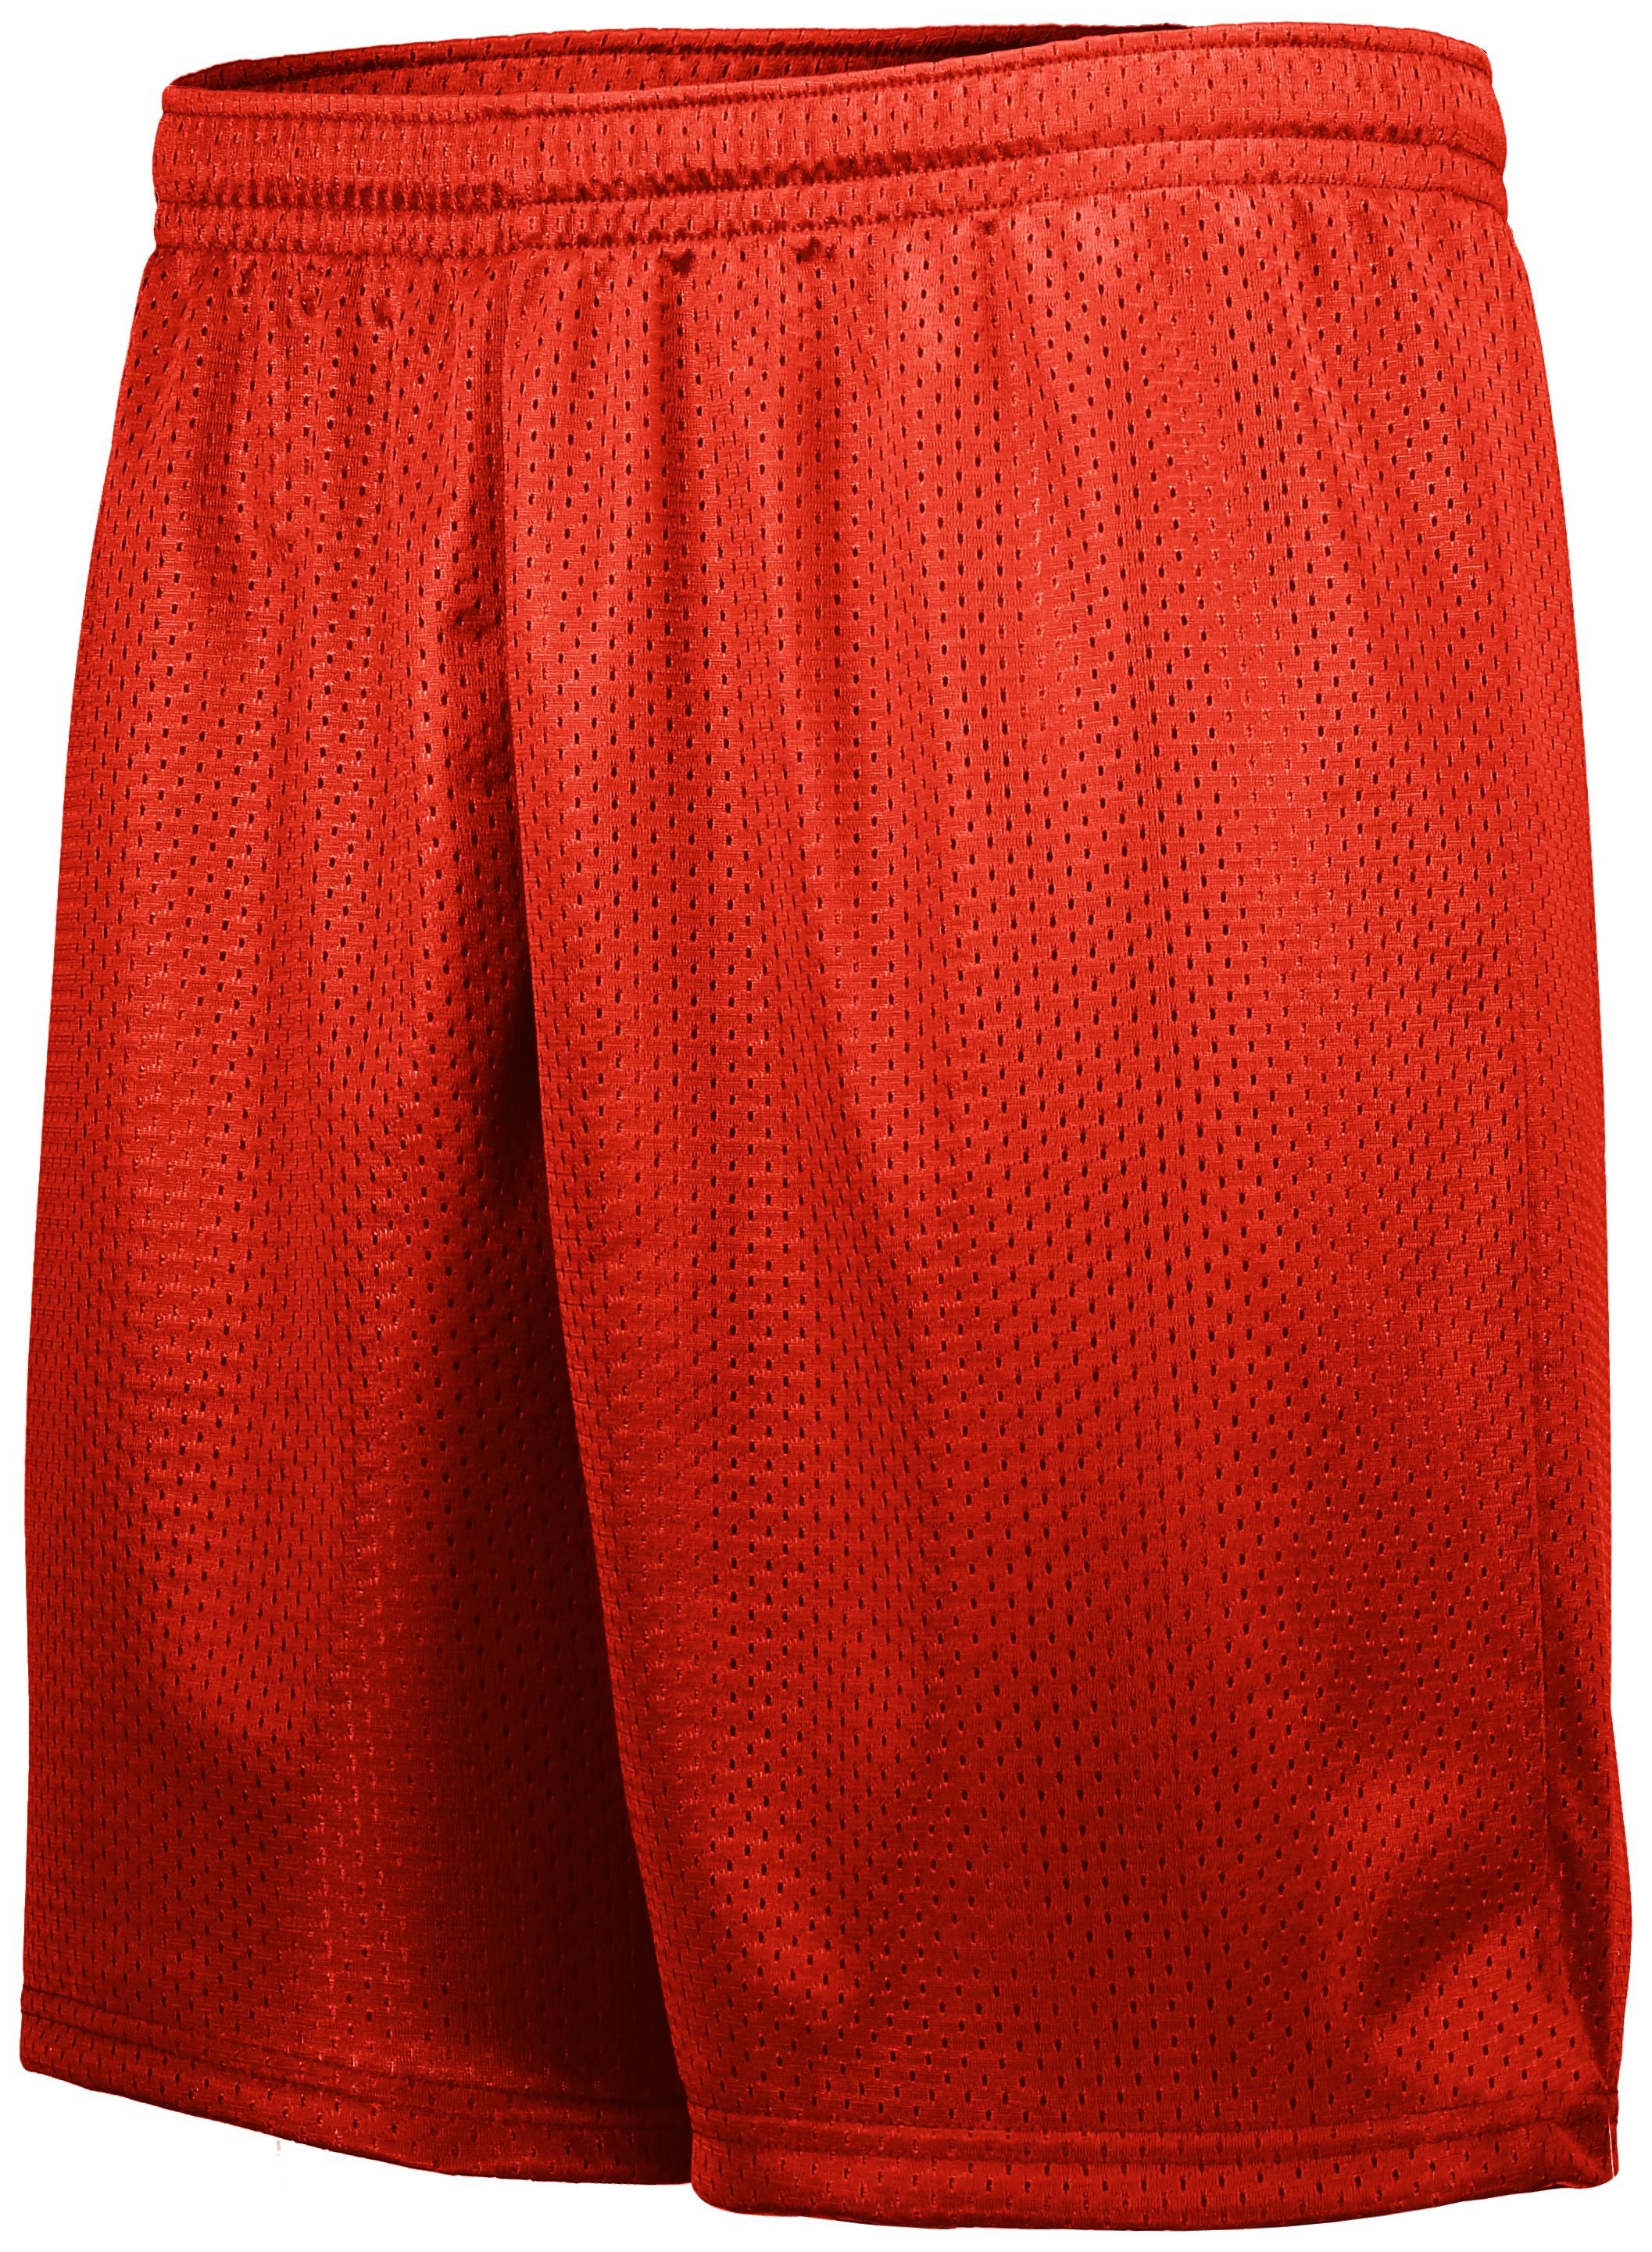 Augusta Sportswear Youth Tricot Mesh Shorts in Orange  -Part of the Youth, Youth-Shorts, Augusta-Products product lines at KanaleyCreations.com